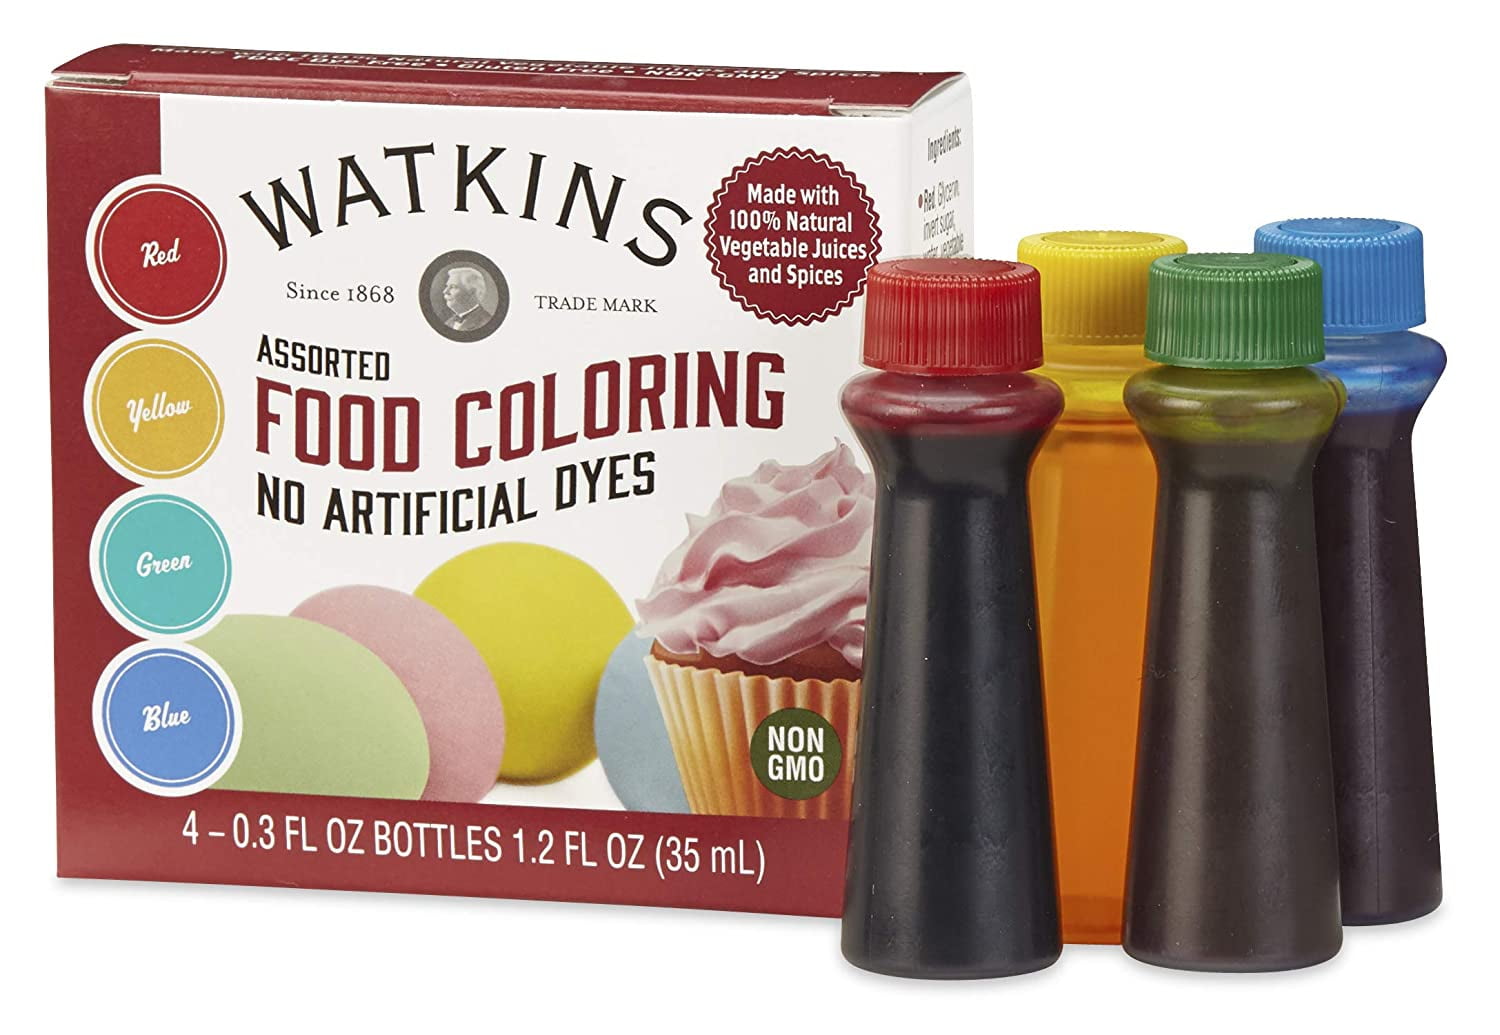 Watkins Assorted Food Coloring, 1 Each Red, Yellow, Green, Blue, Total